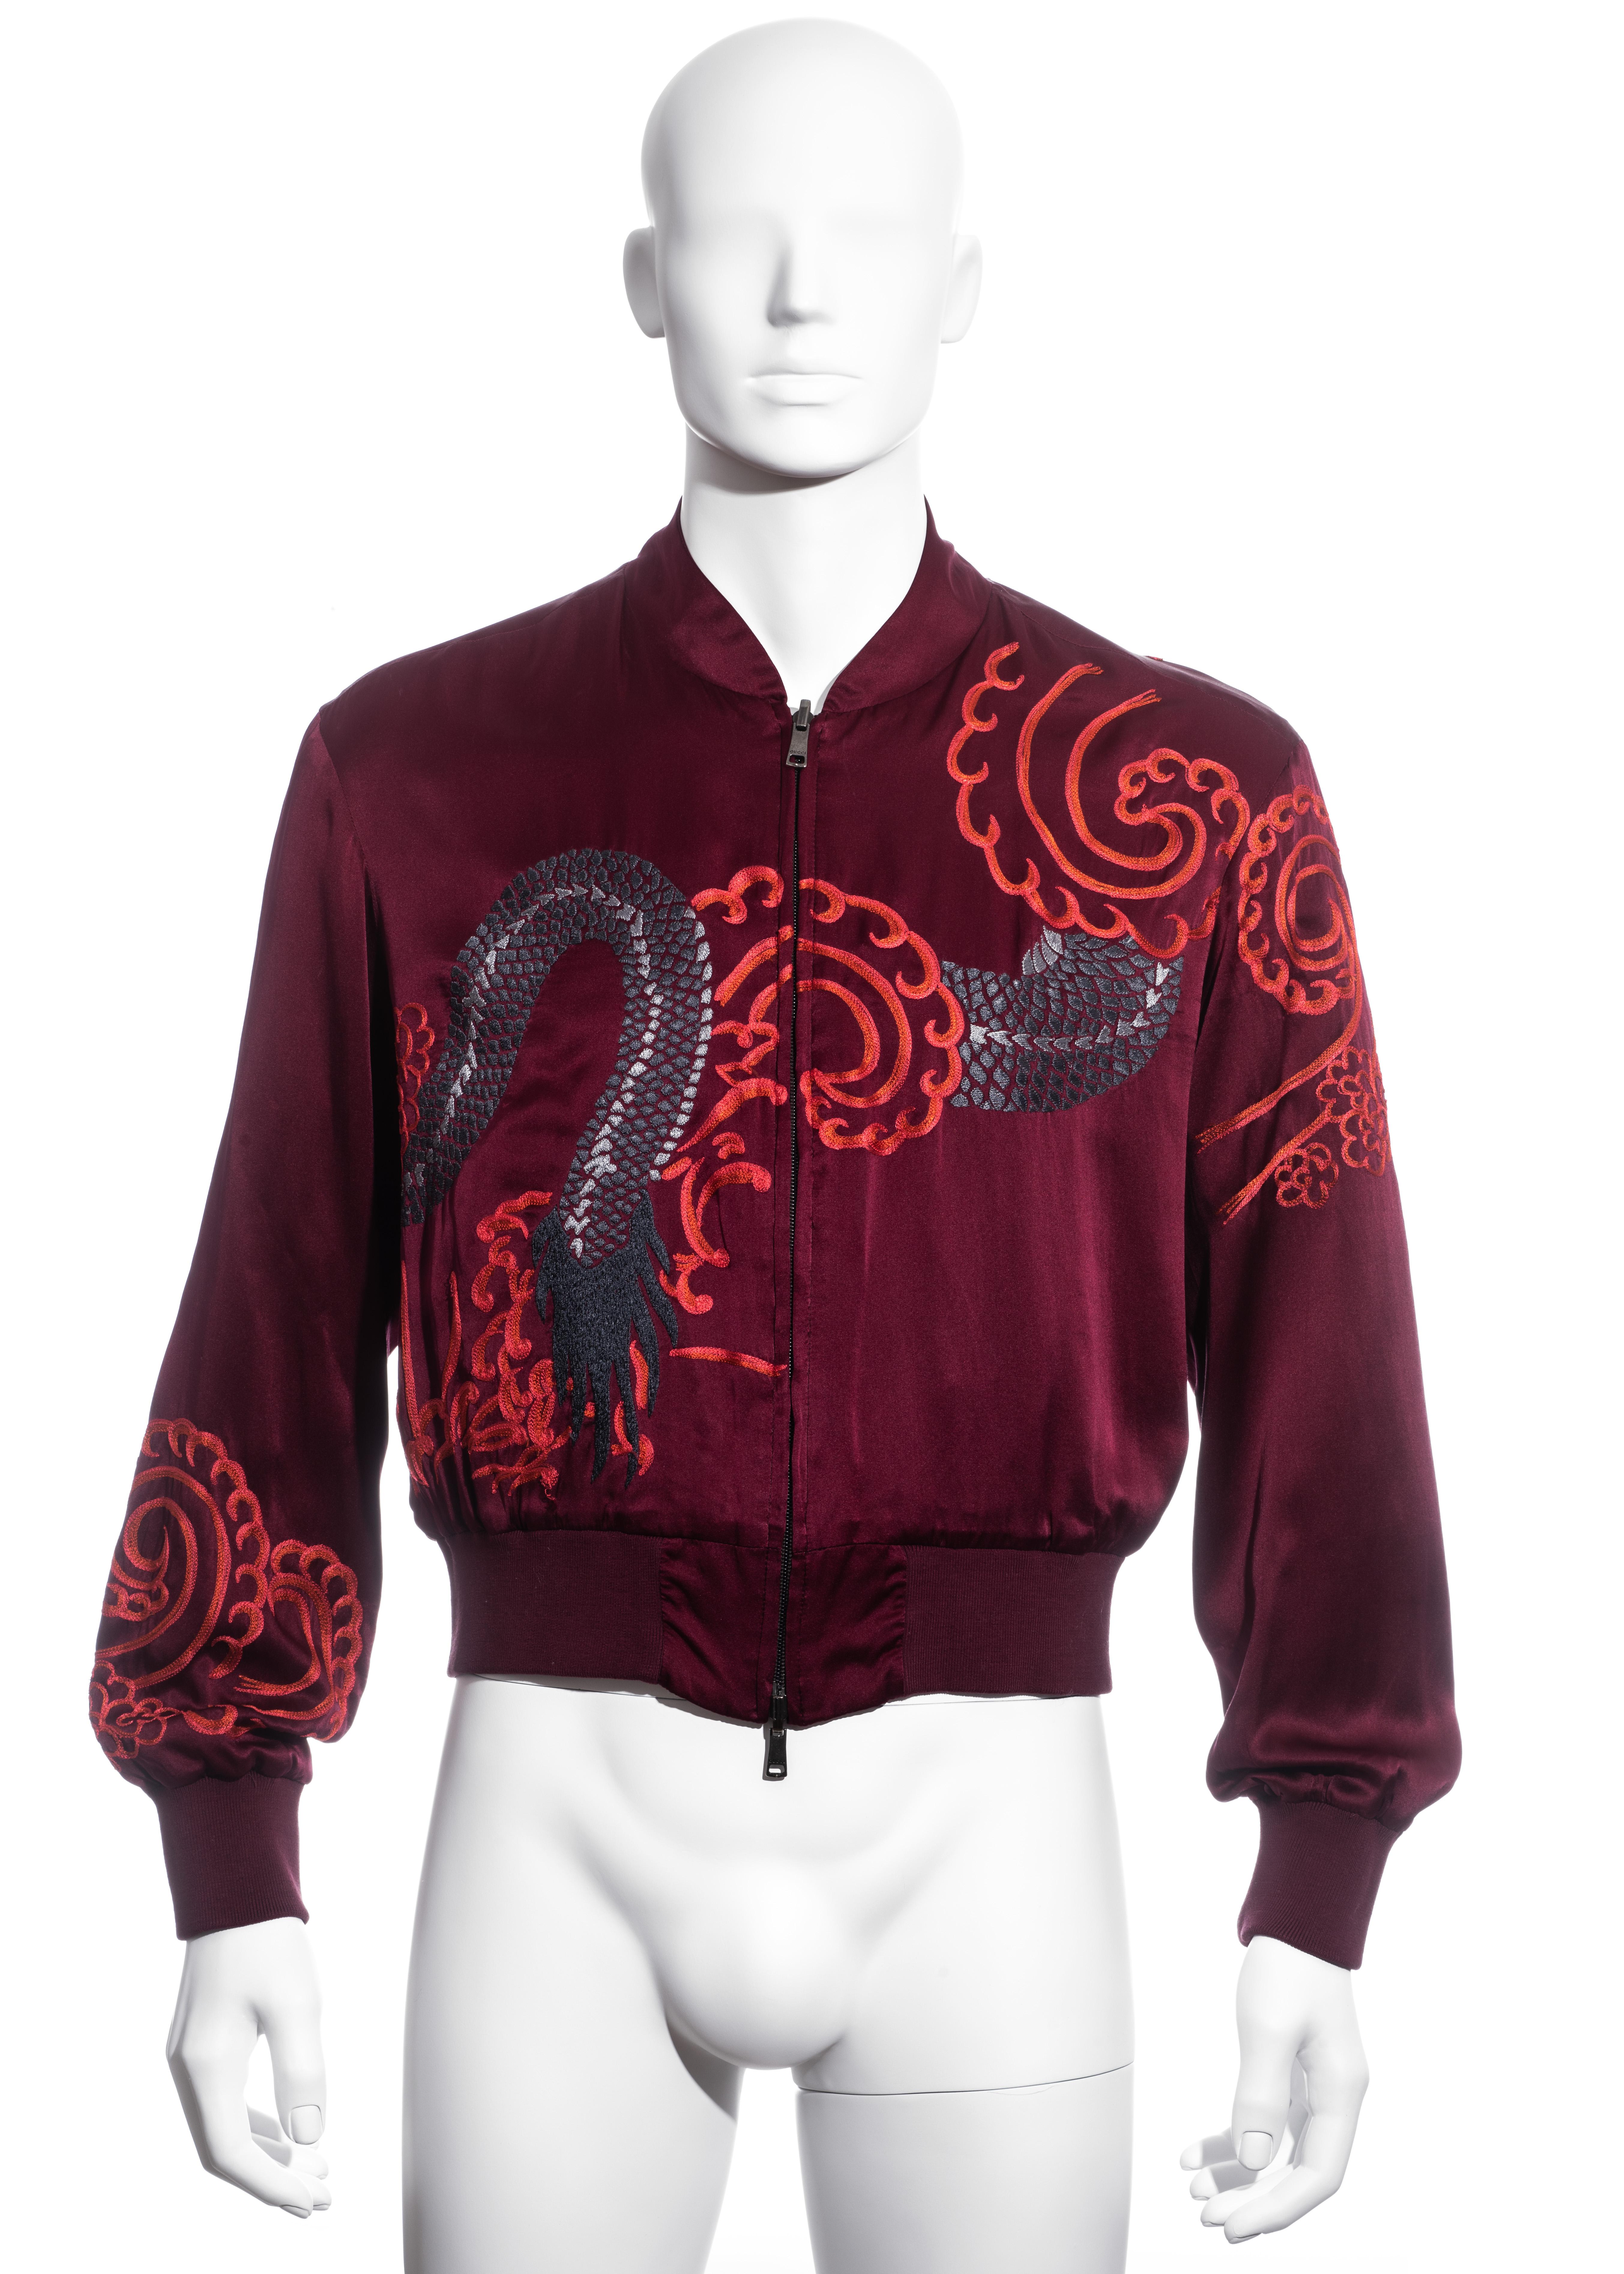 ▪ Men's Gucci red silk bomber jacket 
▪ Designed by Tom Ford
▪ Chinese style dragon embroidery 
▪ Double-ended front zipper 
▪ Reversible; solid colour on other side
▪ Size 48 
▪ Spring-Summer 2001 